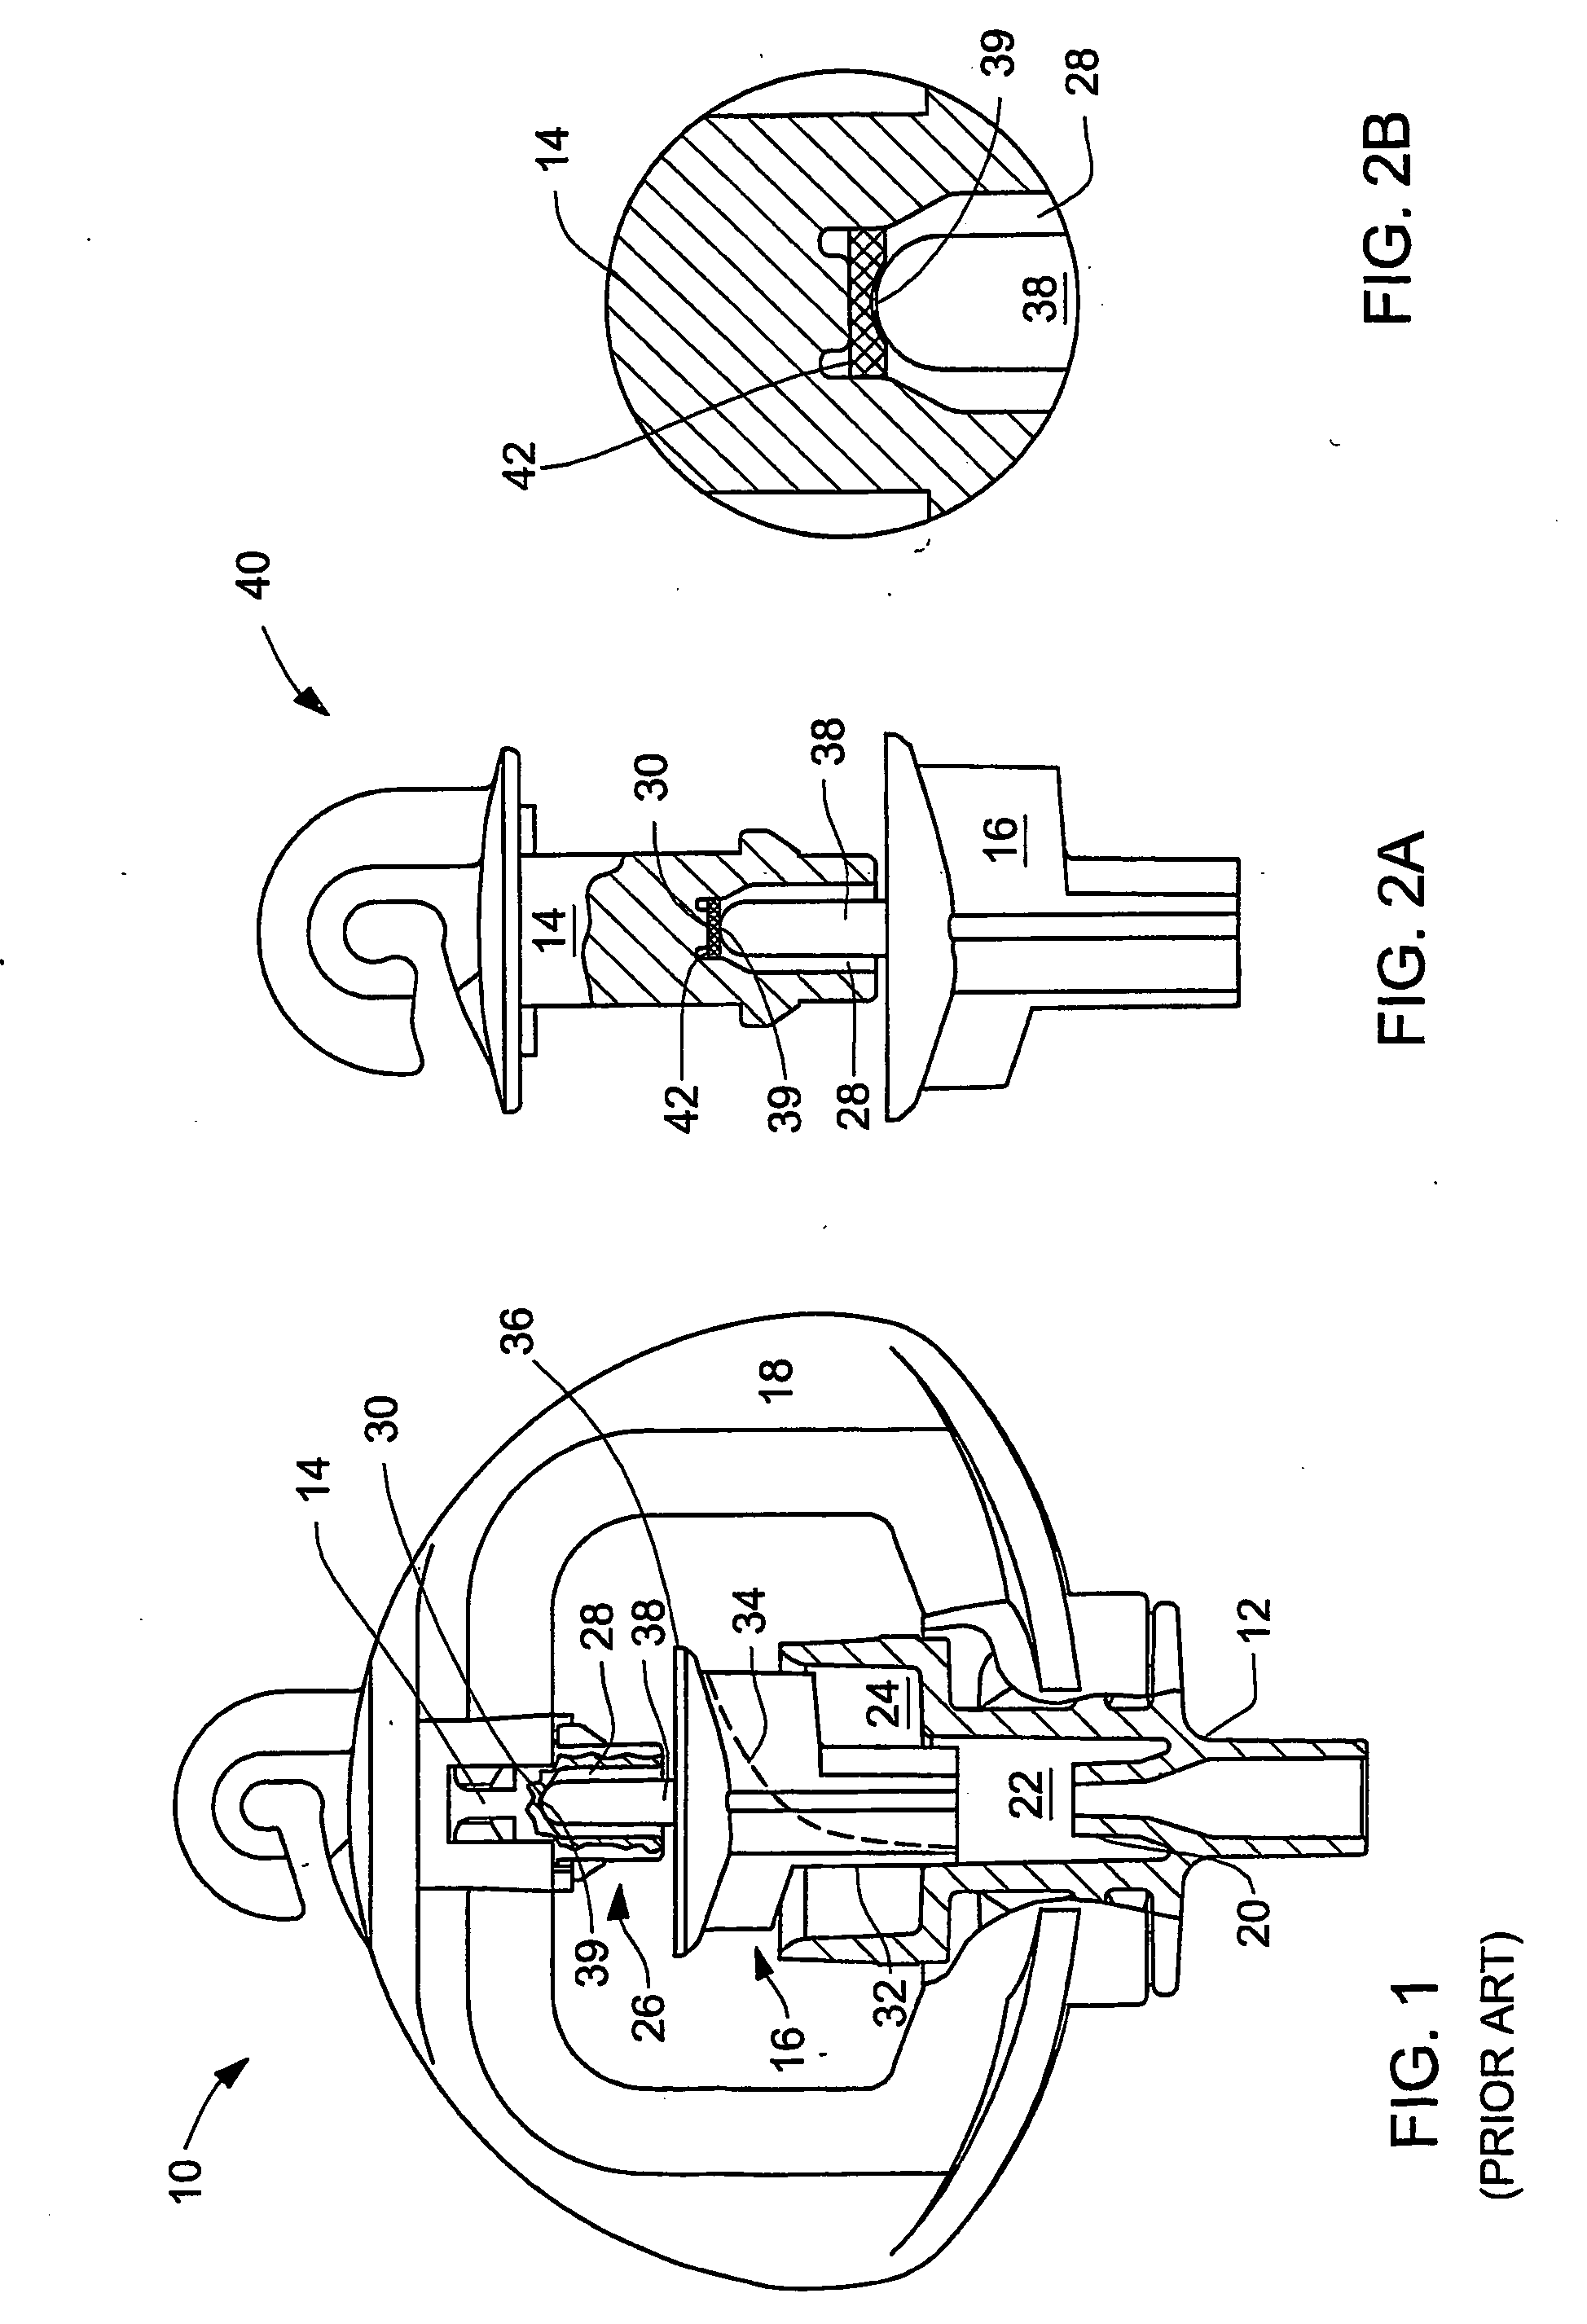 Rotary sprinkler with reduced wear